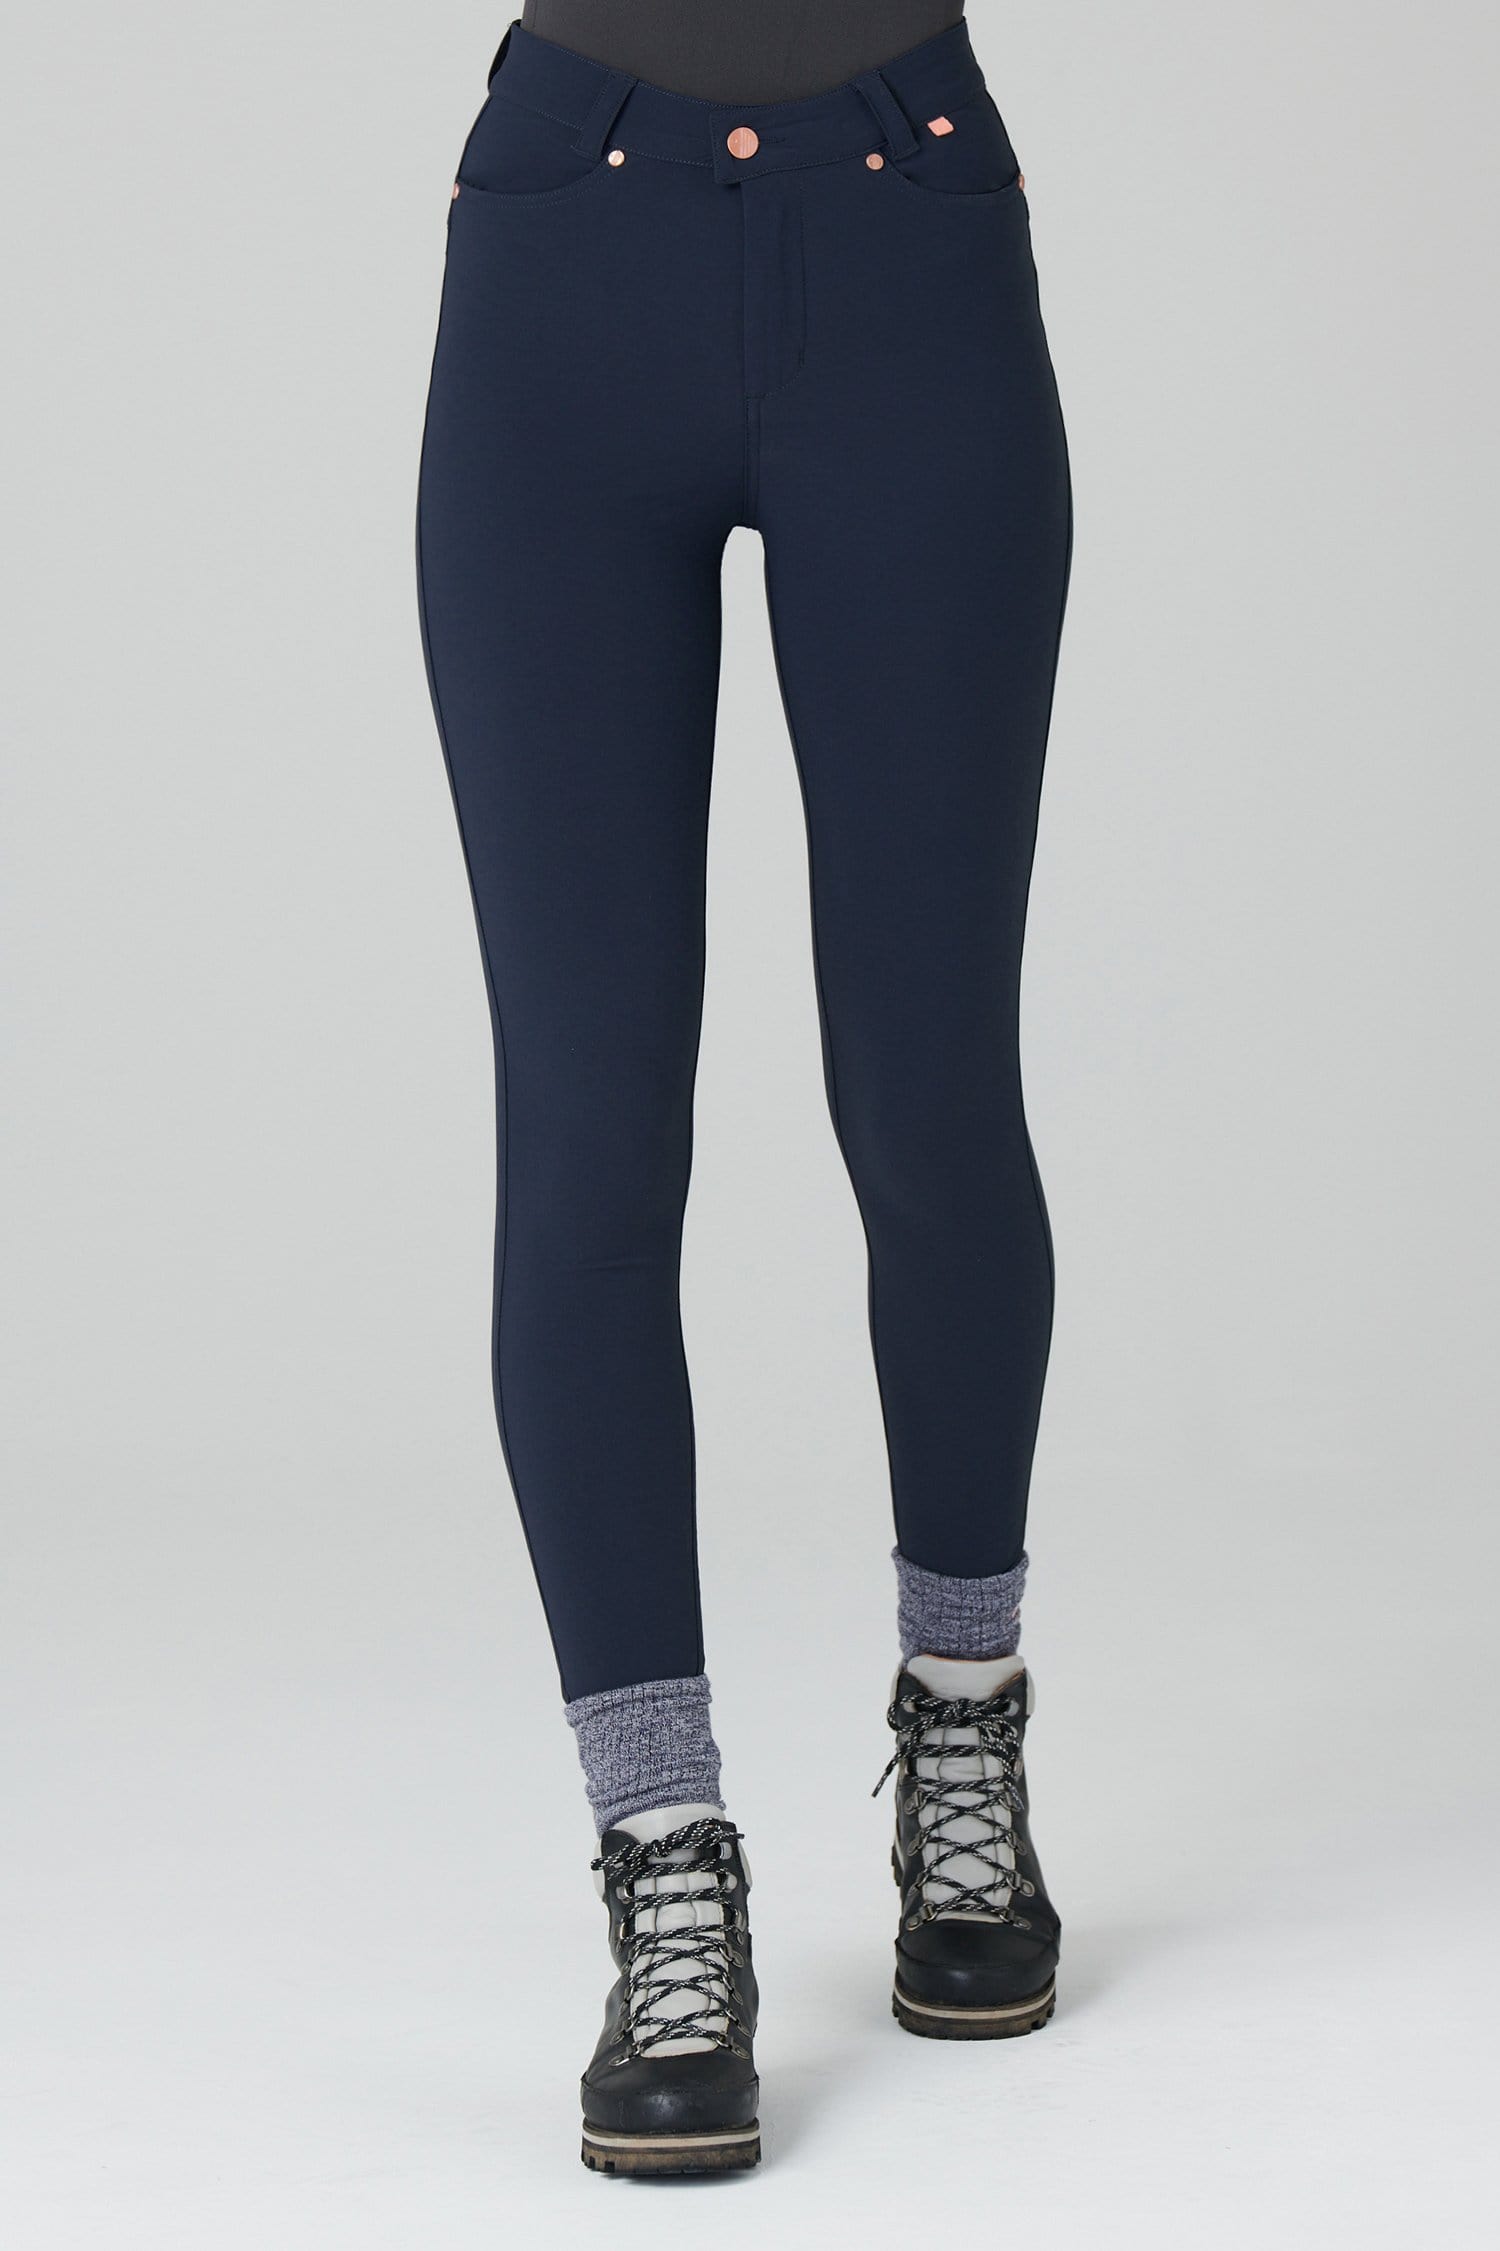 Thermal Skinny Outdoor Trousers - Deep Navy - 26p / Uk8 - Womens - Acai Outdoorwear